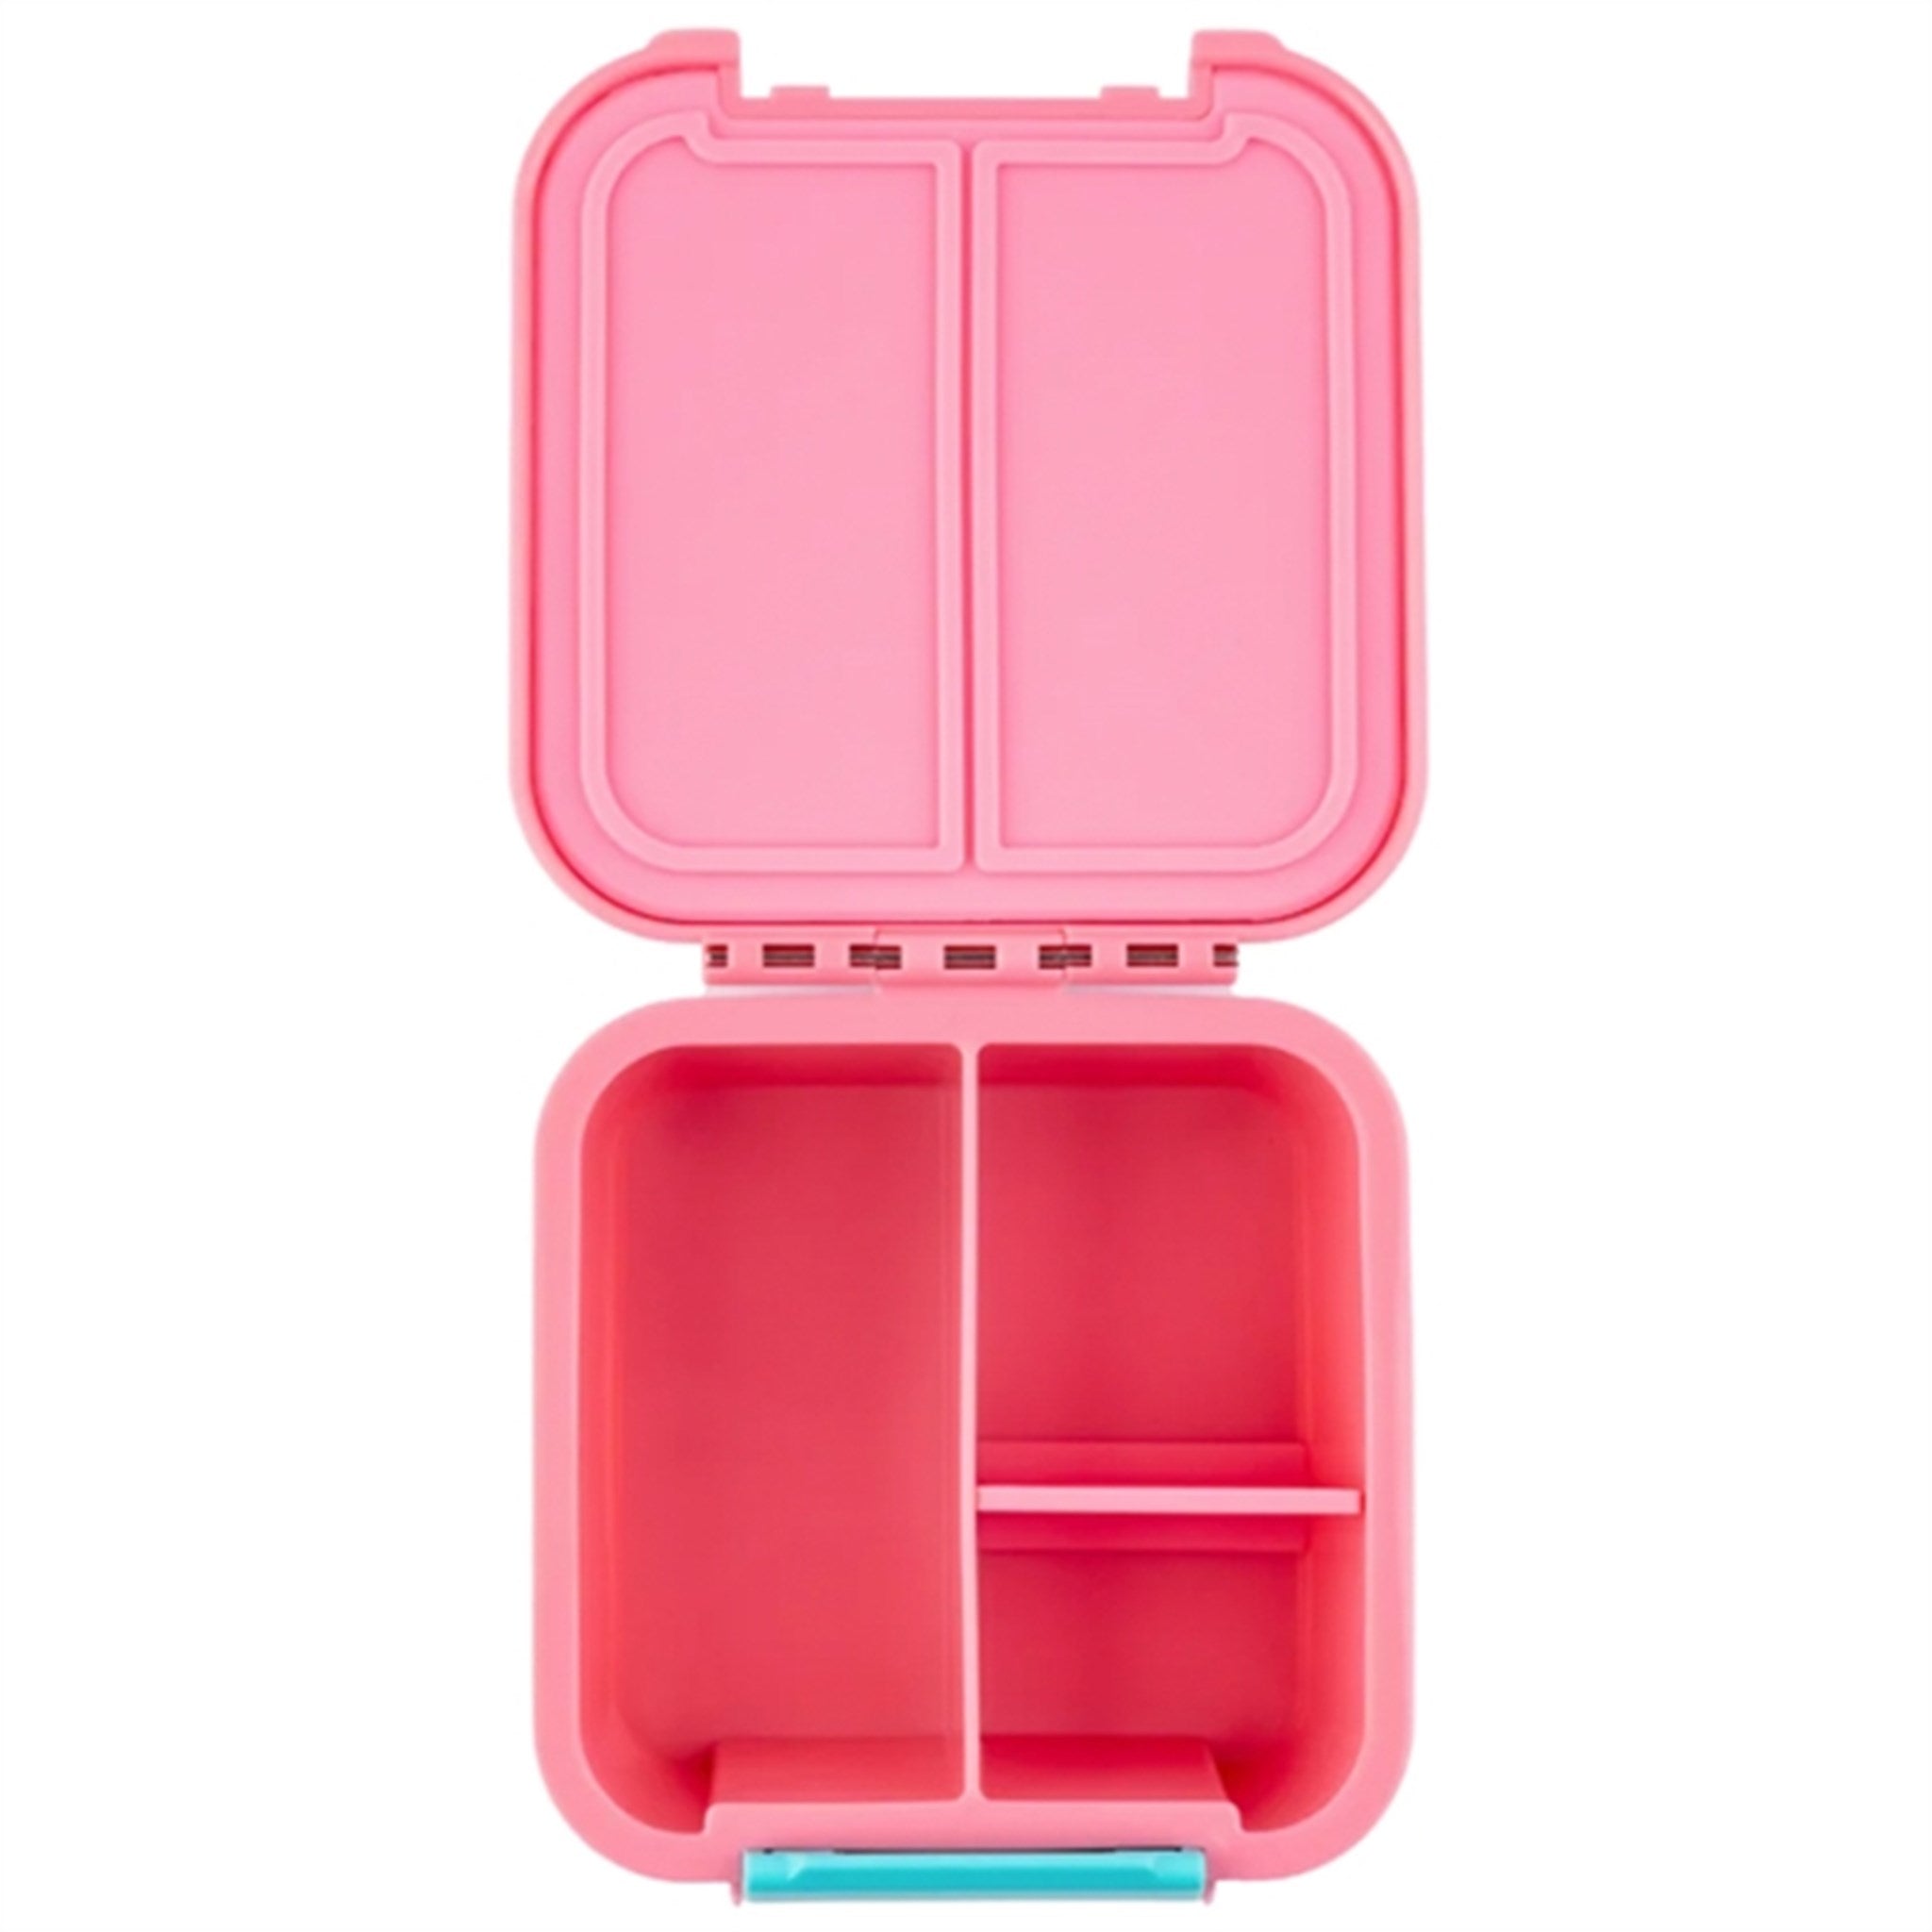 Little Lunch Box Co Bento 2 Lunch Box Strawberry 5